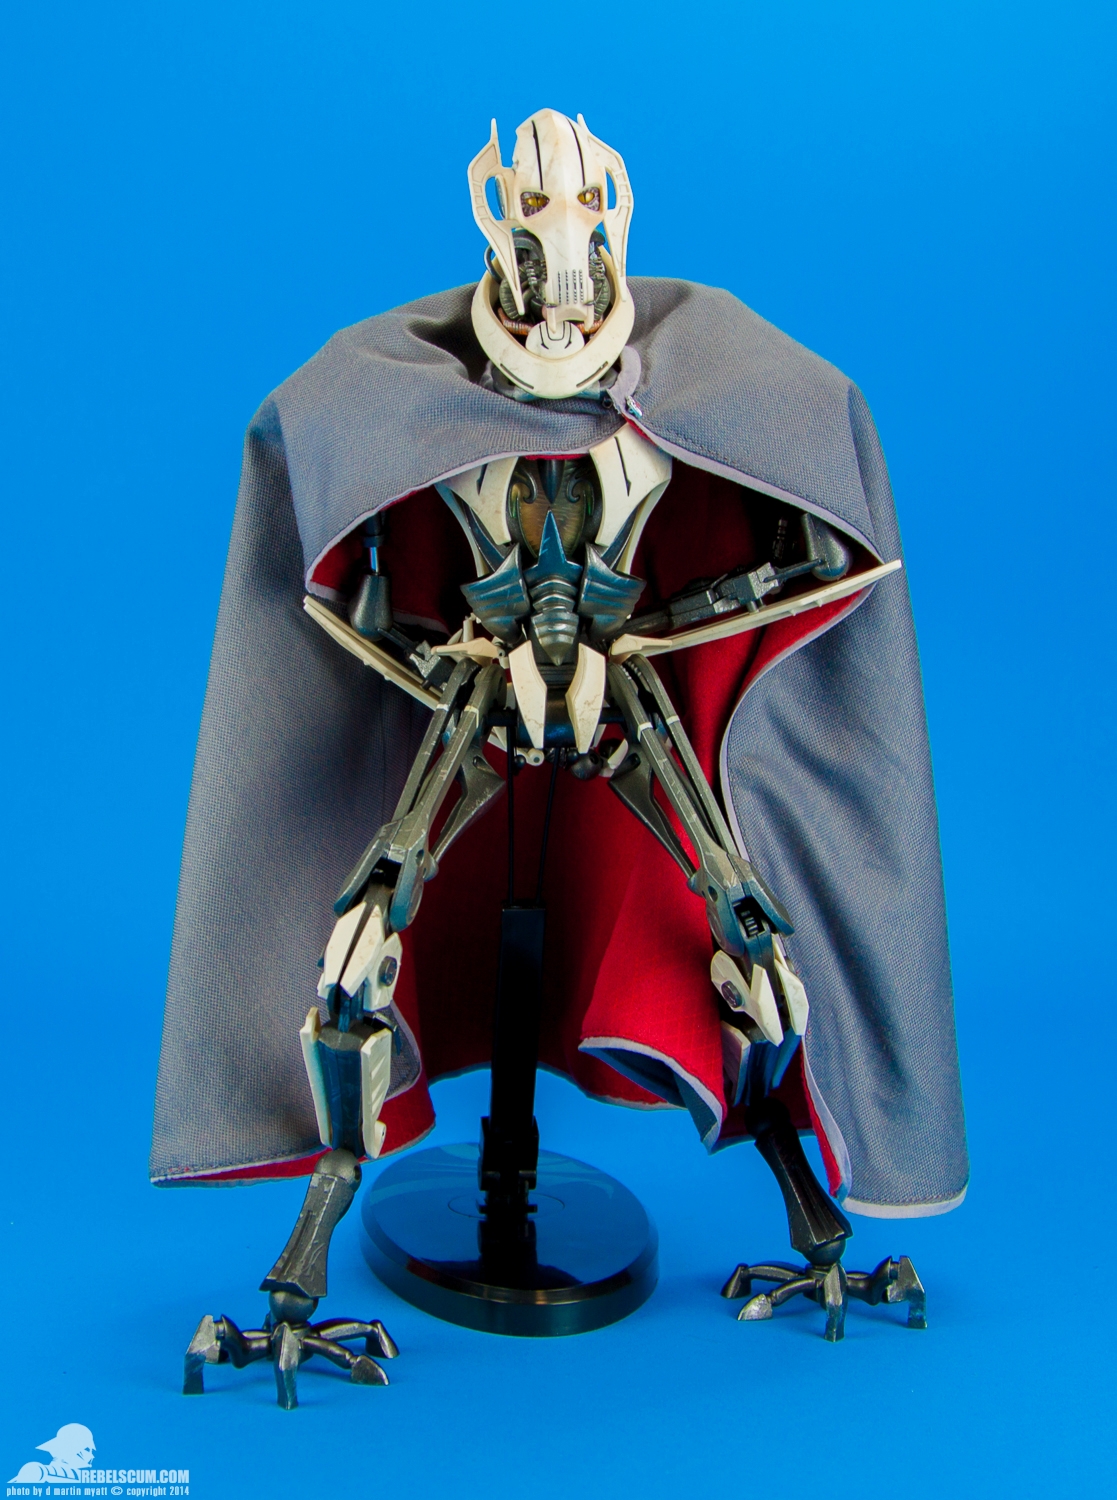 General-Grievous-Sixth-Scale-Figure-Sideshow-Collectibles-005.jpg